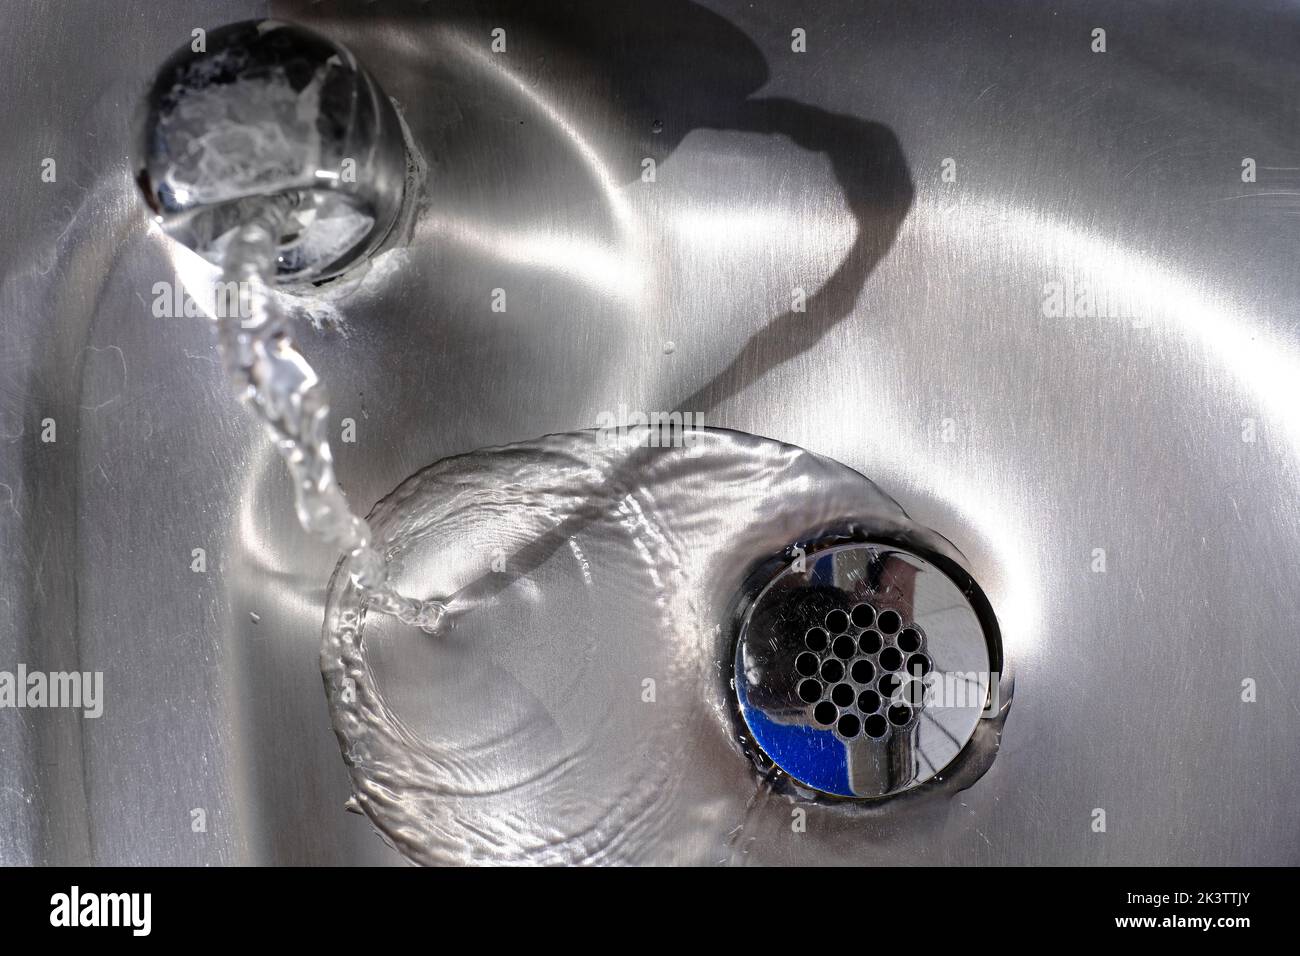 Steel metal shiny sink with water flowing down the drain Stock Photo